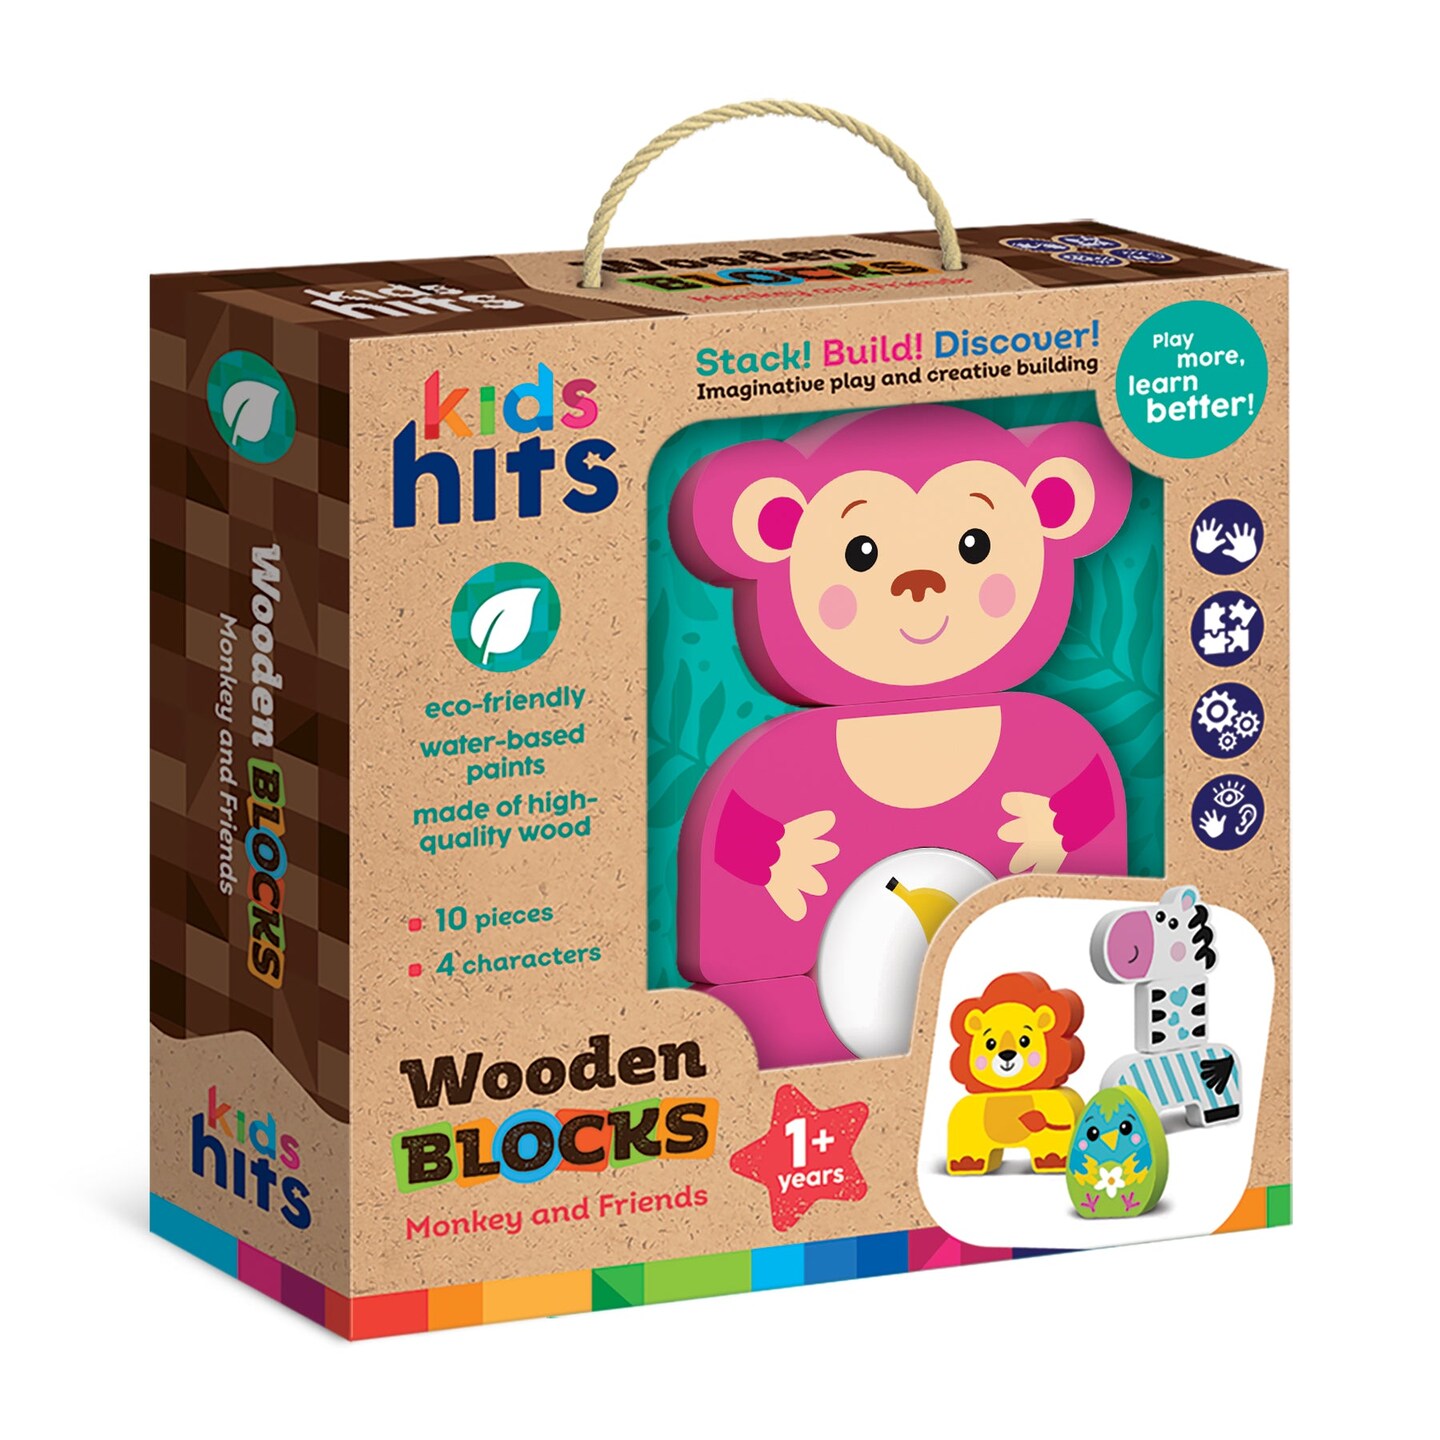 Kids Hits: Build Your Own Adventure with the Wooden Blocks Monkey and Friends!